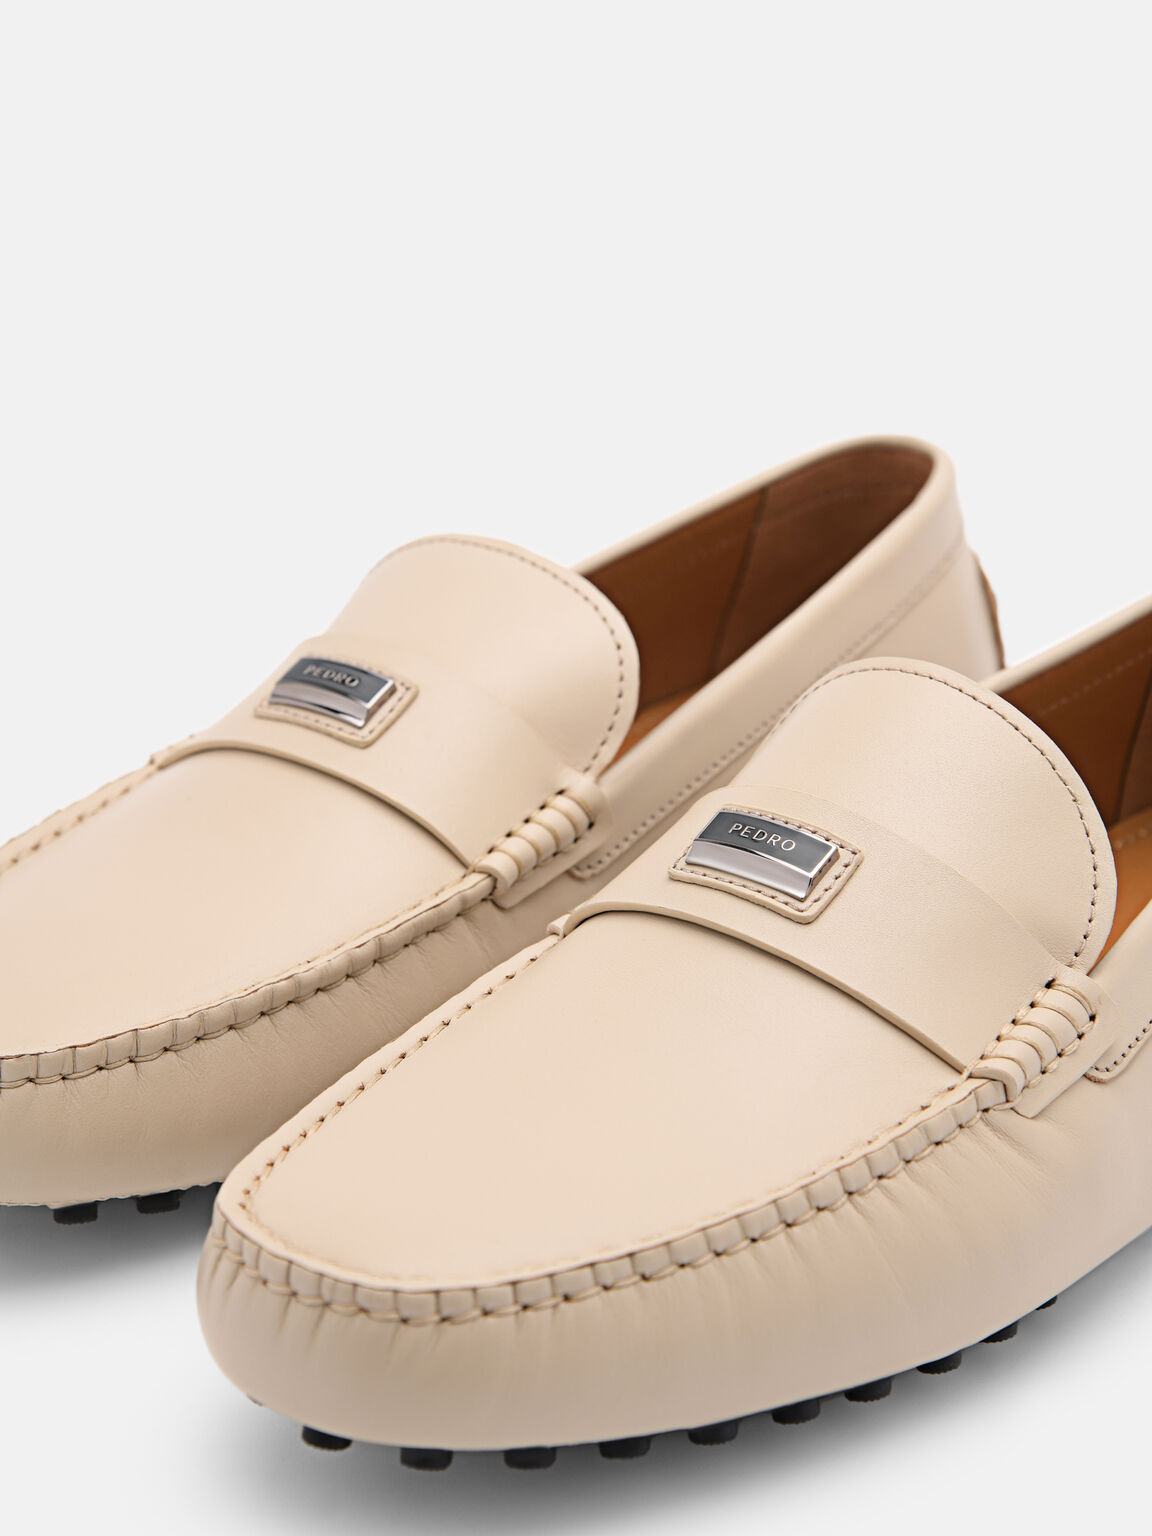 Dillon Leather Moccasins, Taupe